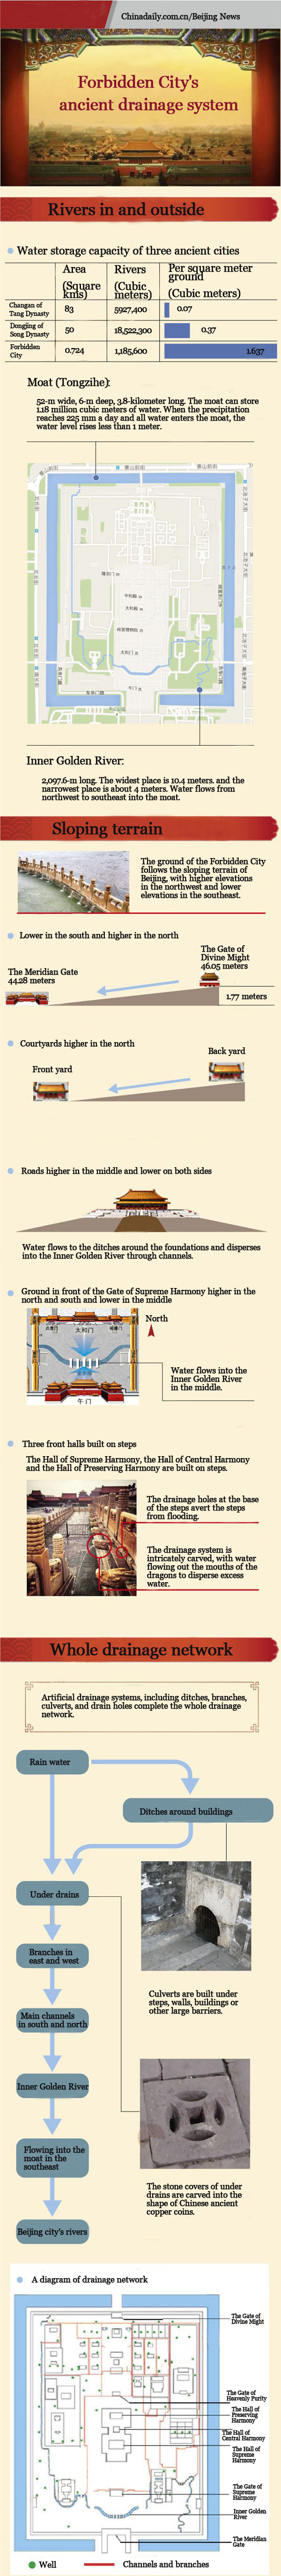 Graphic on Forbidden City's ancient drainage system